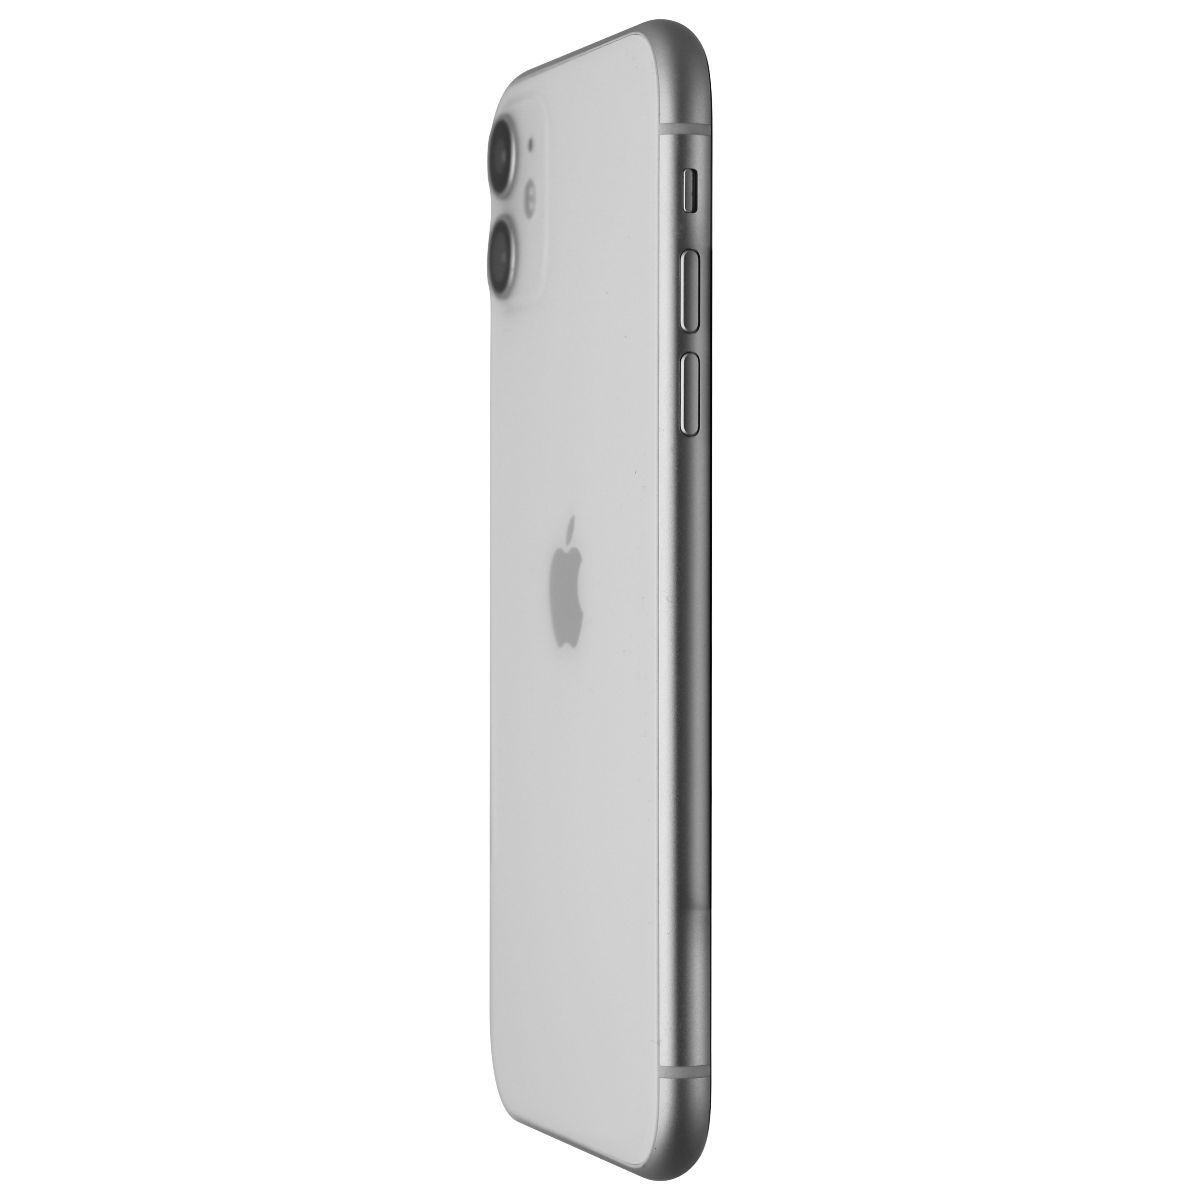 Apple iPhone 11 (6.1-inch) Smartphone (A2111) Dish Boost ONLY - 64GB / White Cell Phones & Smartphones Apple    - Simple Cell Bulk Wholesale Pricing - USA Seller